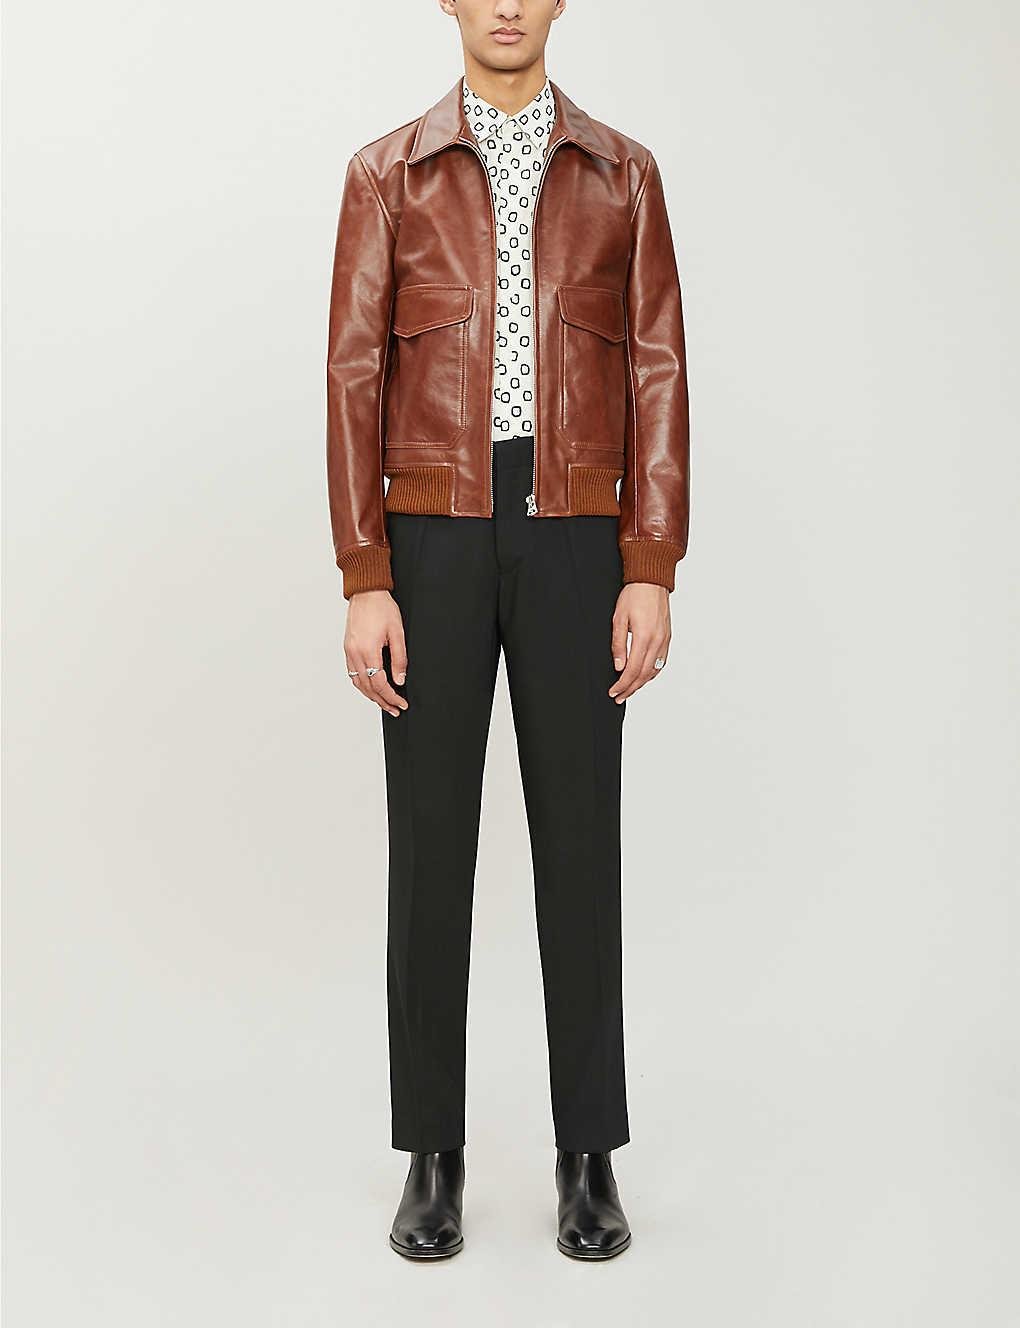 Sandro Aviator Leather Jacket in Brown for Men - Lyst